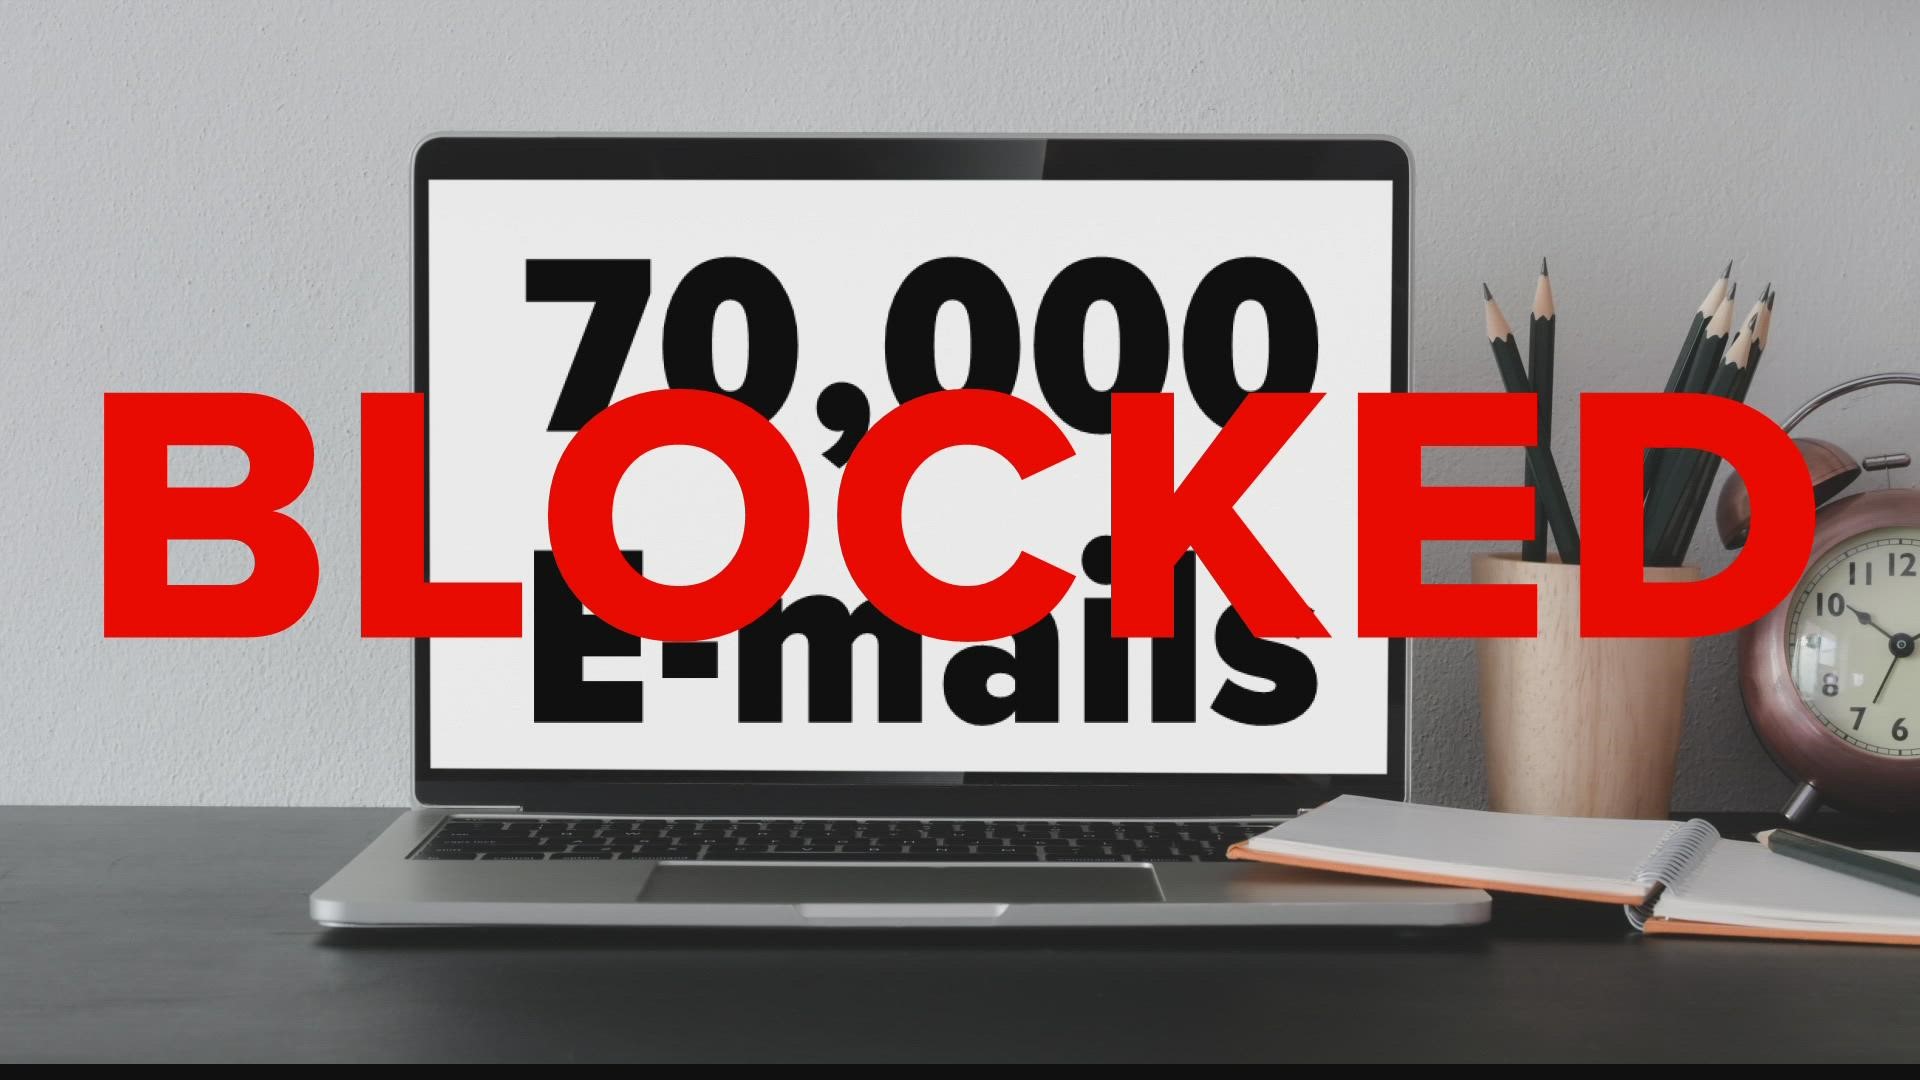 Indiana's largest teachers union reports 70,000 emails to lawmakers were blocked. Now the state is exploring if it needs to make changes to its spam filter.